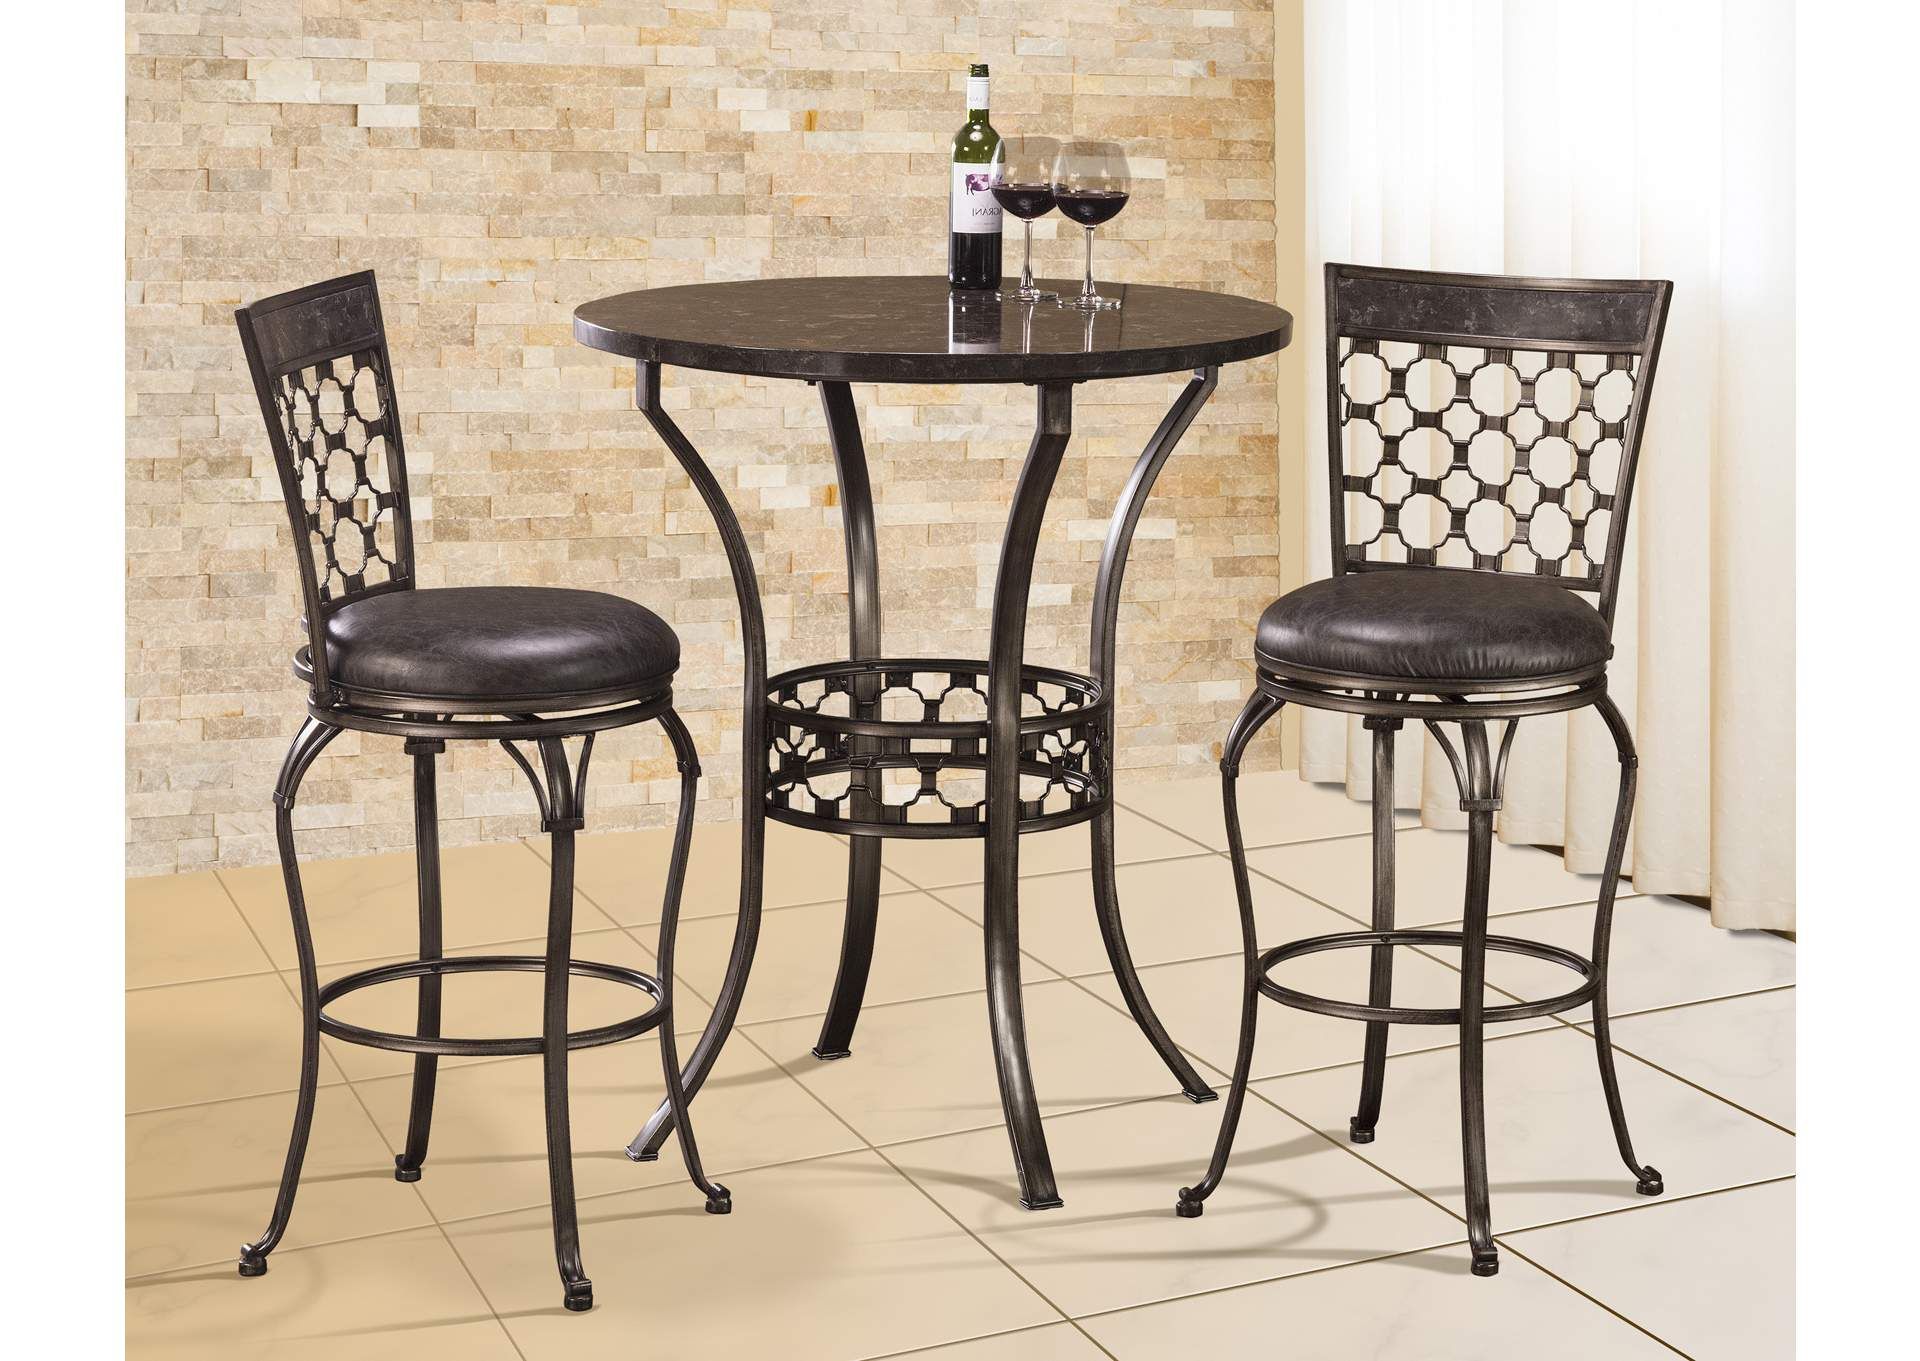 Famous Brescello Pewter 3 Piece Bar Height Bistro Dining Set Kirk Imports Intended For 3 Piece Bistro Dining Sets (View 1 of 15)